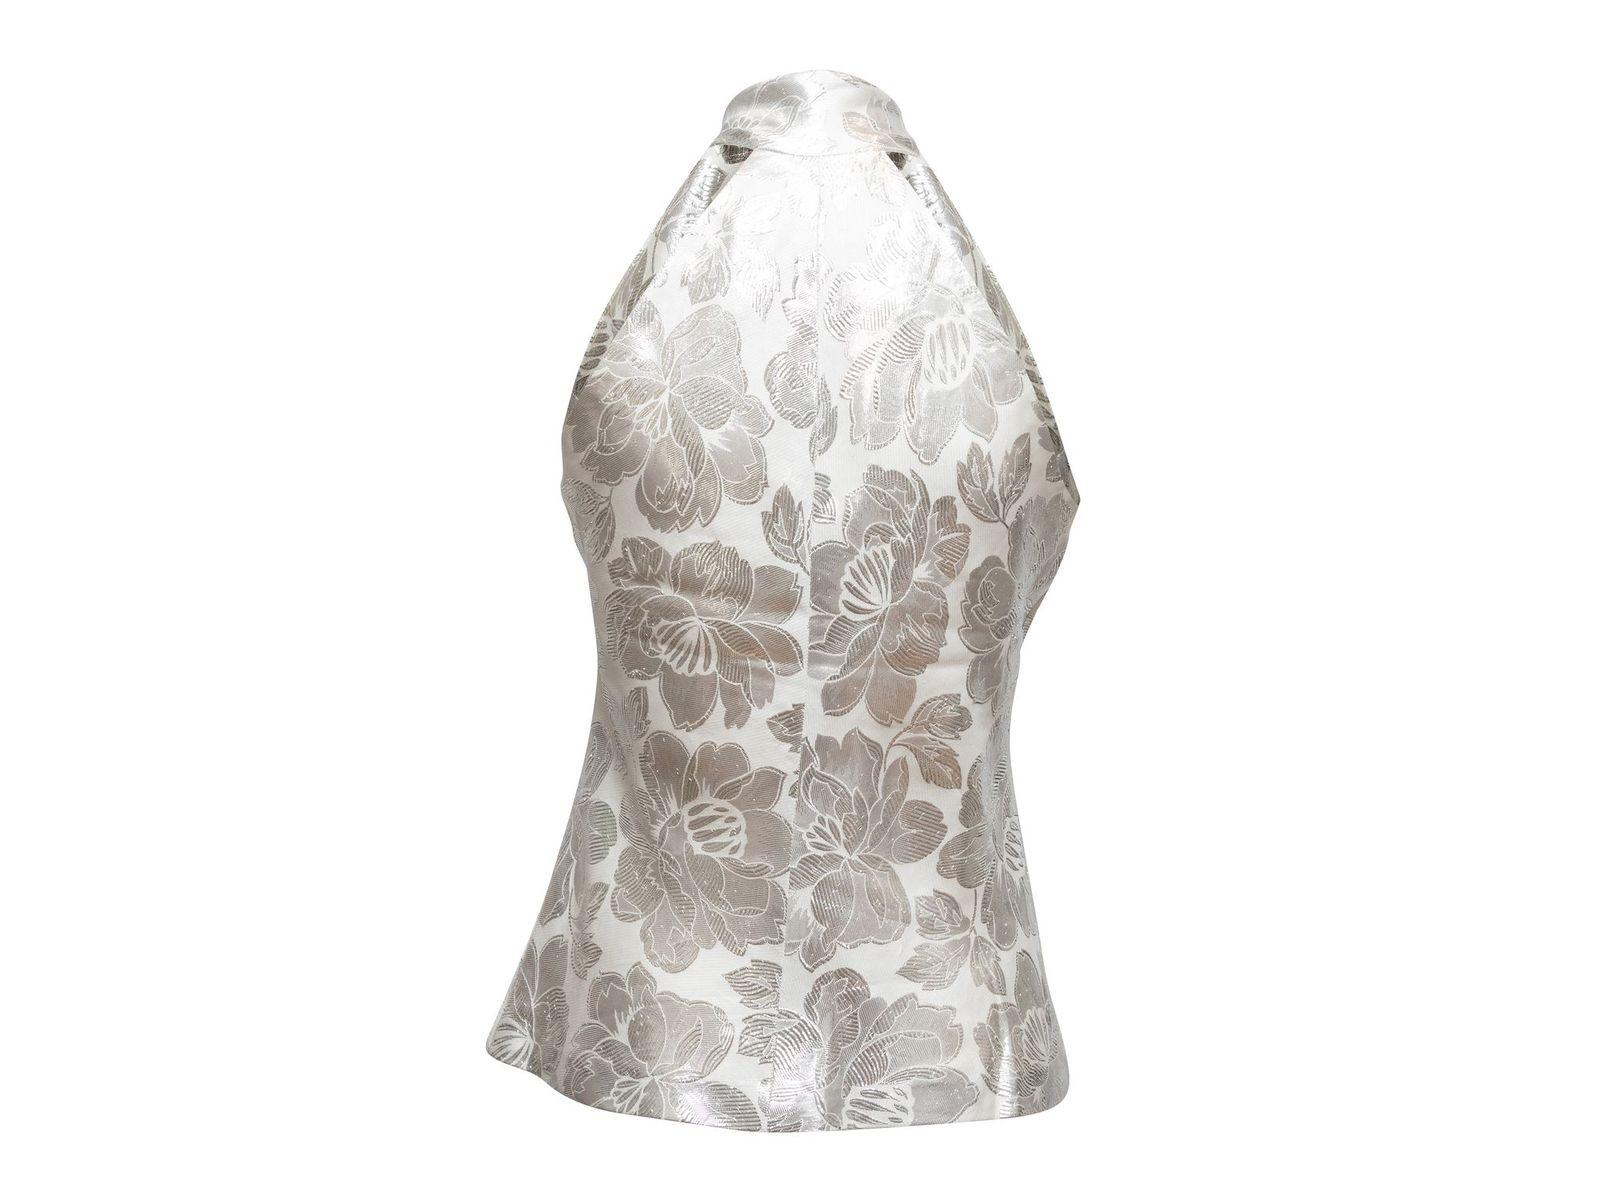 Tuleh White & Silver Silk Floral Patterned Halter Top 1